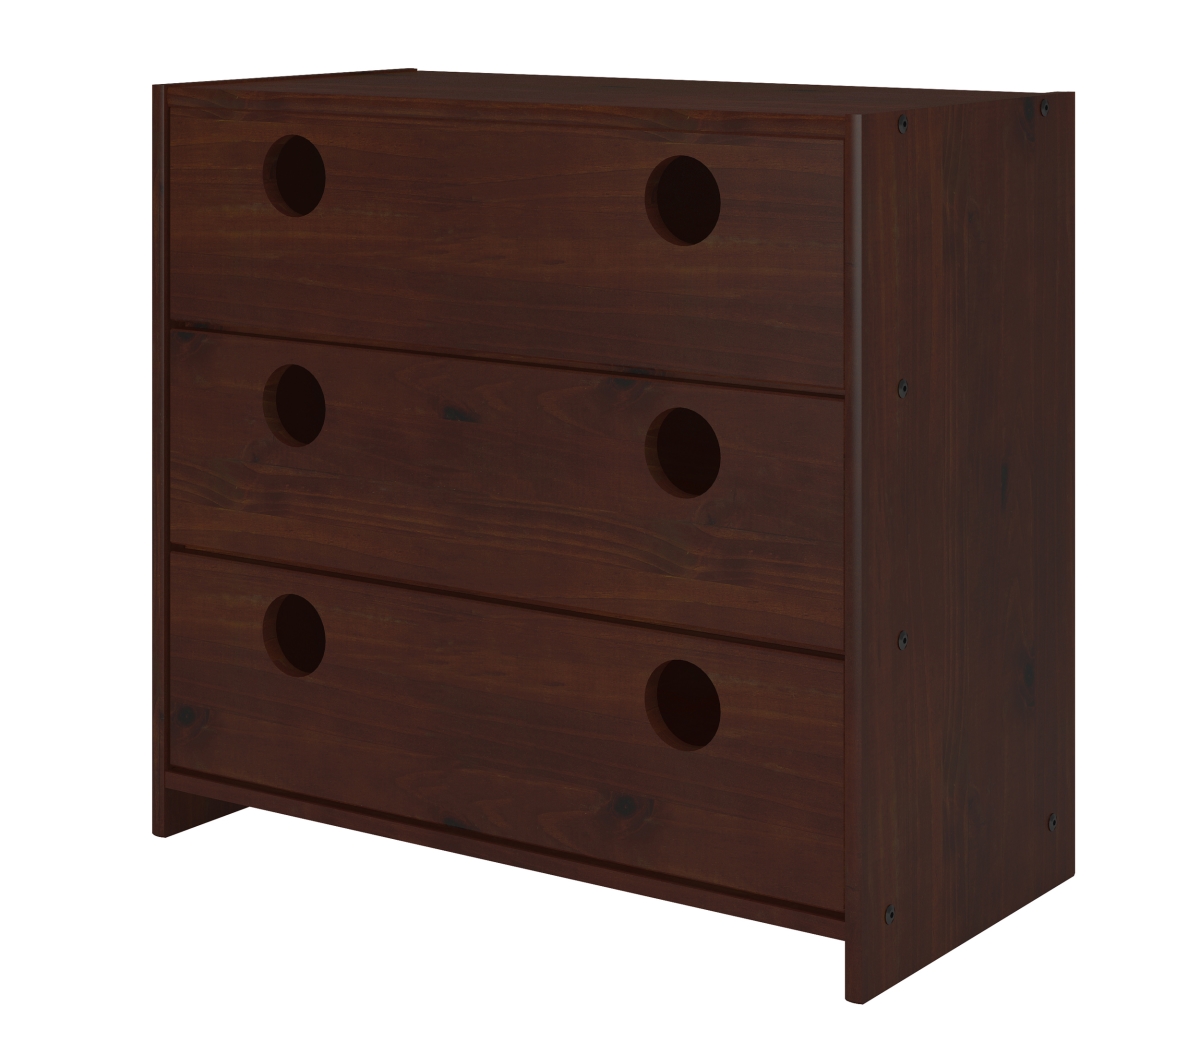 Pd-780b-tcp 3 Drawer Chest In Dark Cappuccino